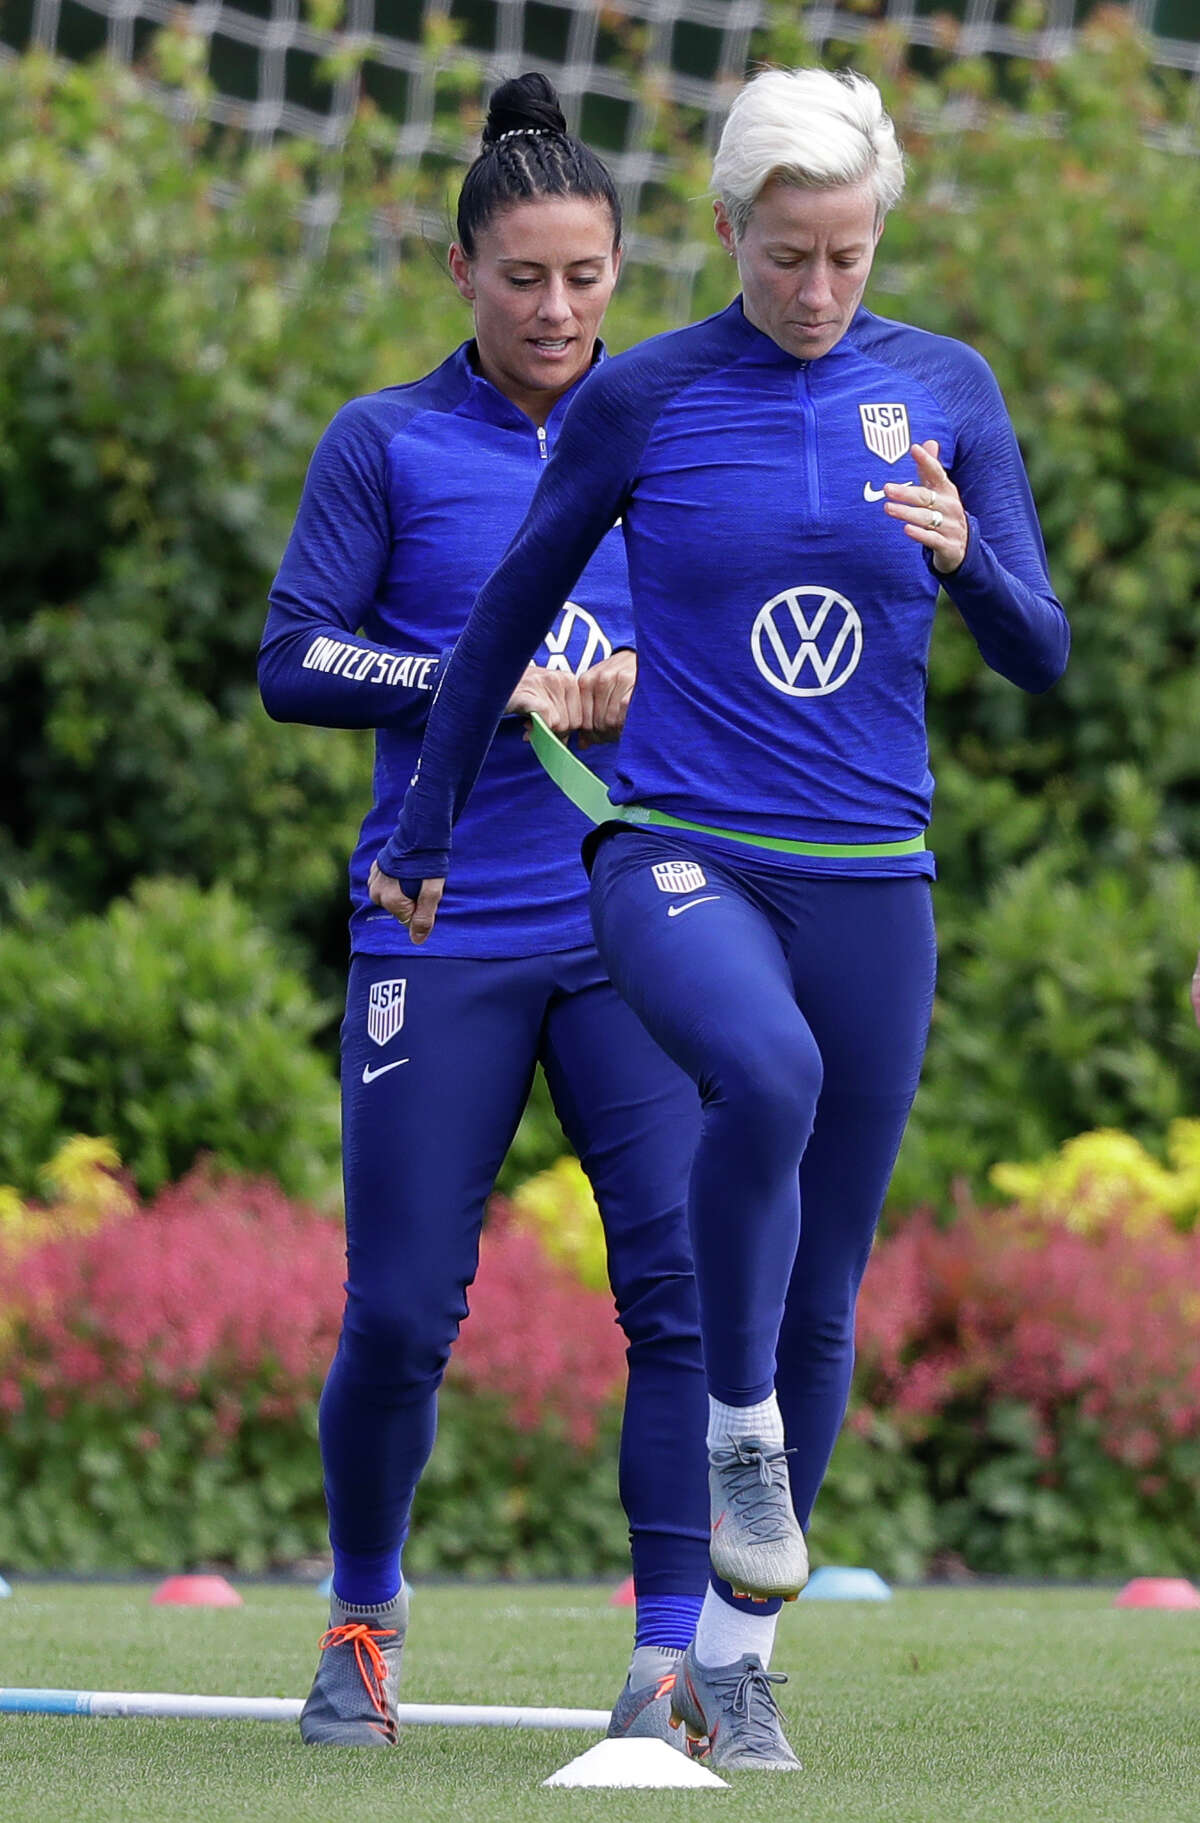 Teammates have Rapinoe’s back Ali Krieger (pictured above), who also plays on the United States team, responded to Donald Trump’s Twitter thread: “I know women you cannot control or grope anger you, but I stand by (Megan) & will sit this one out as well. I don’t support this administration nor their fight against LGBTQ+ citizens, immigrants & our most vulnerable.”